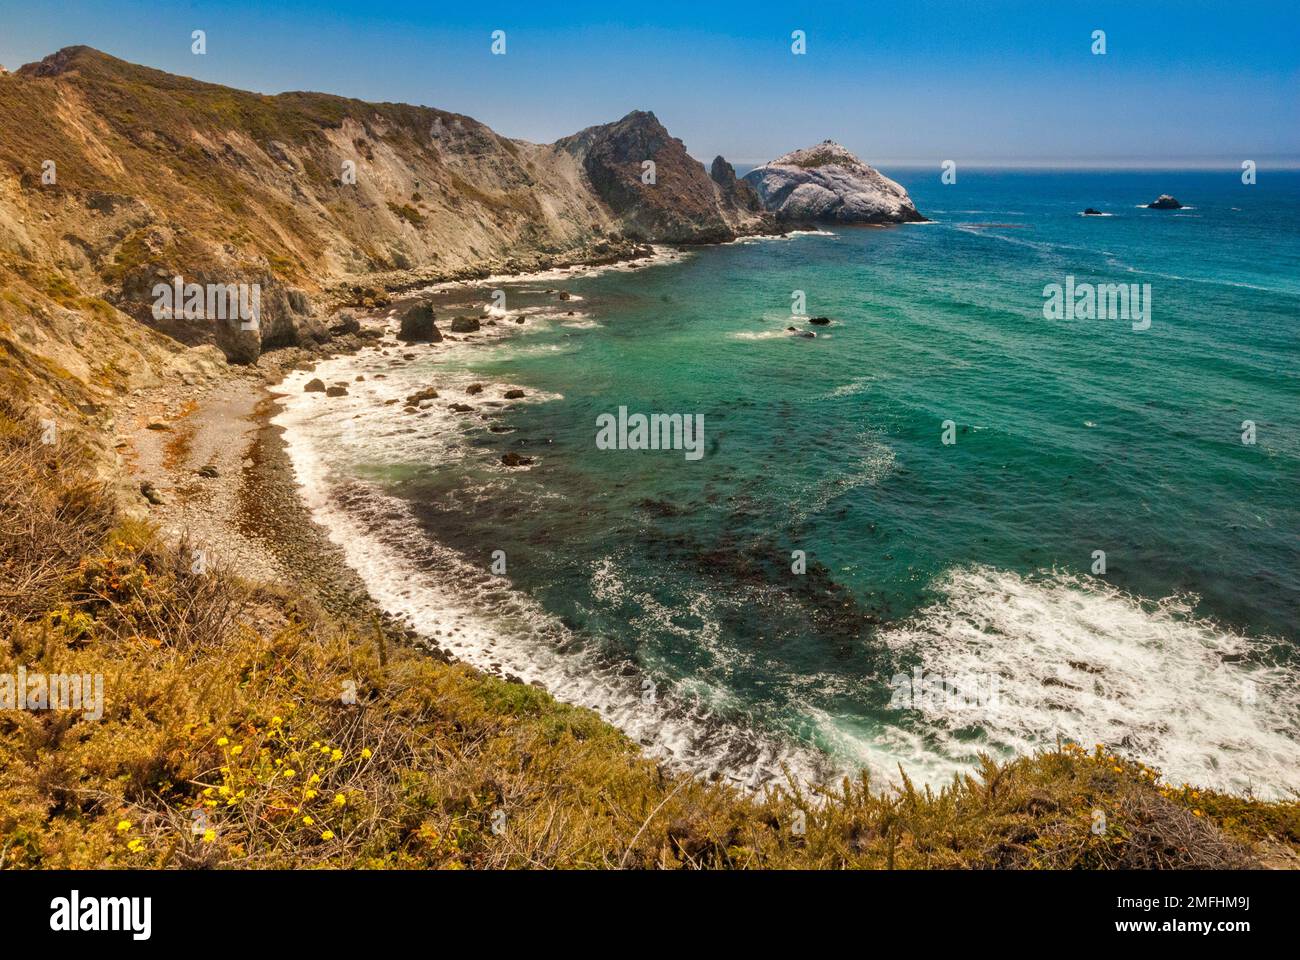 Bay and beach in Willow Creek Area, Big Sur, California, USA Stock Photo